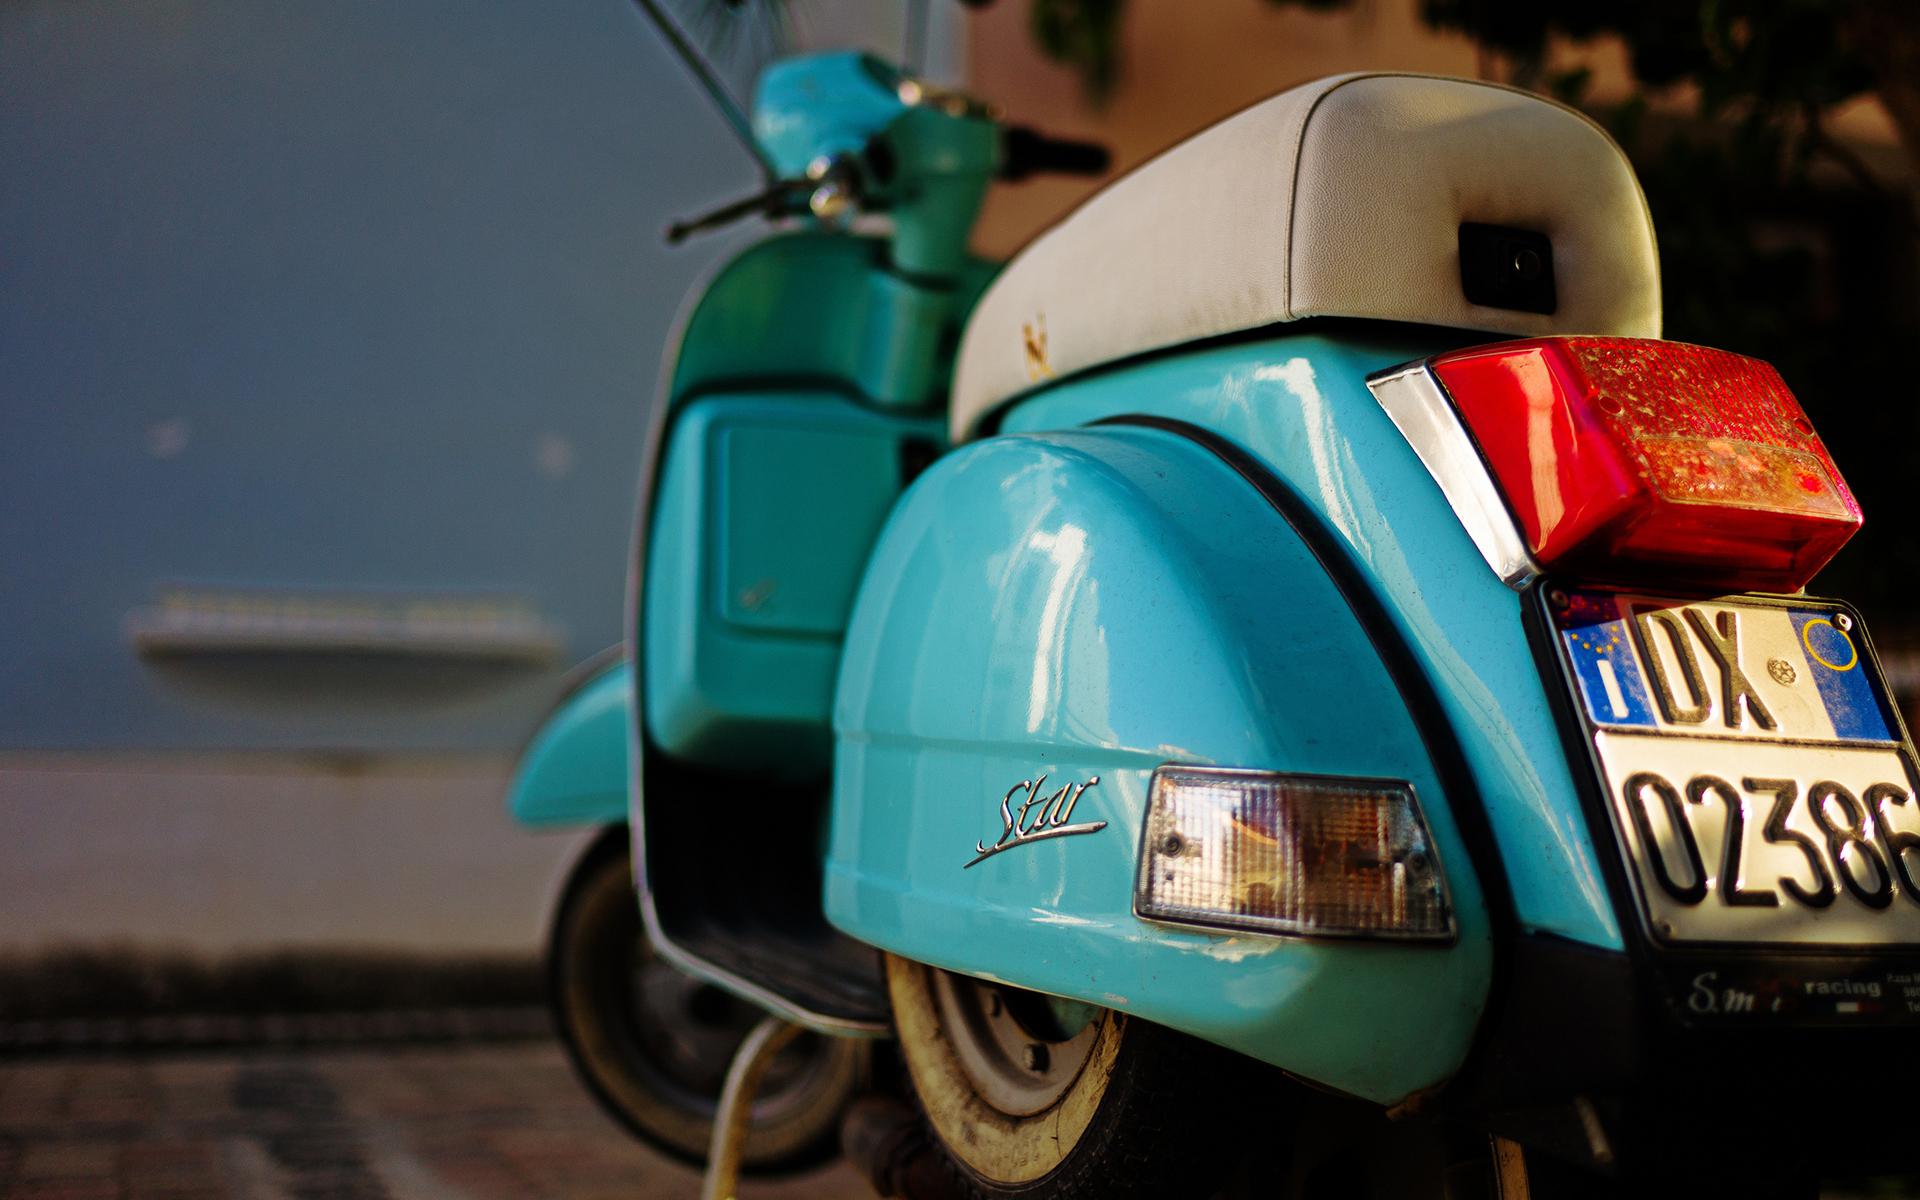 Scooter - (#95444) - High Quality and Resolution Wallpapers on ...